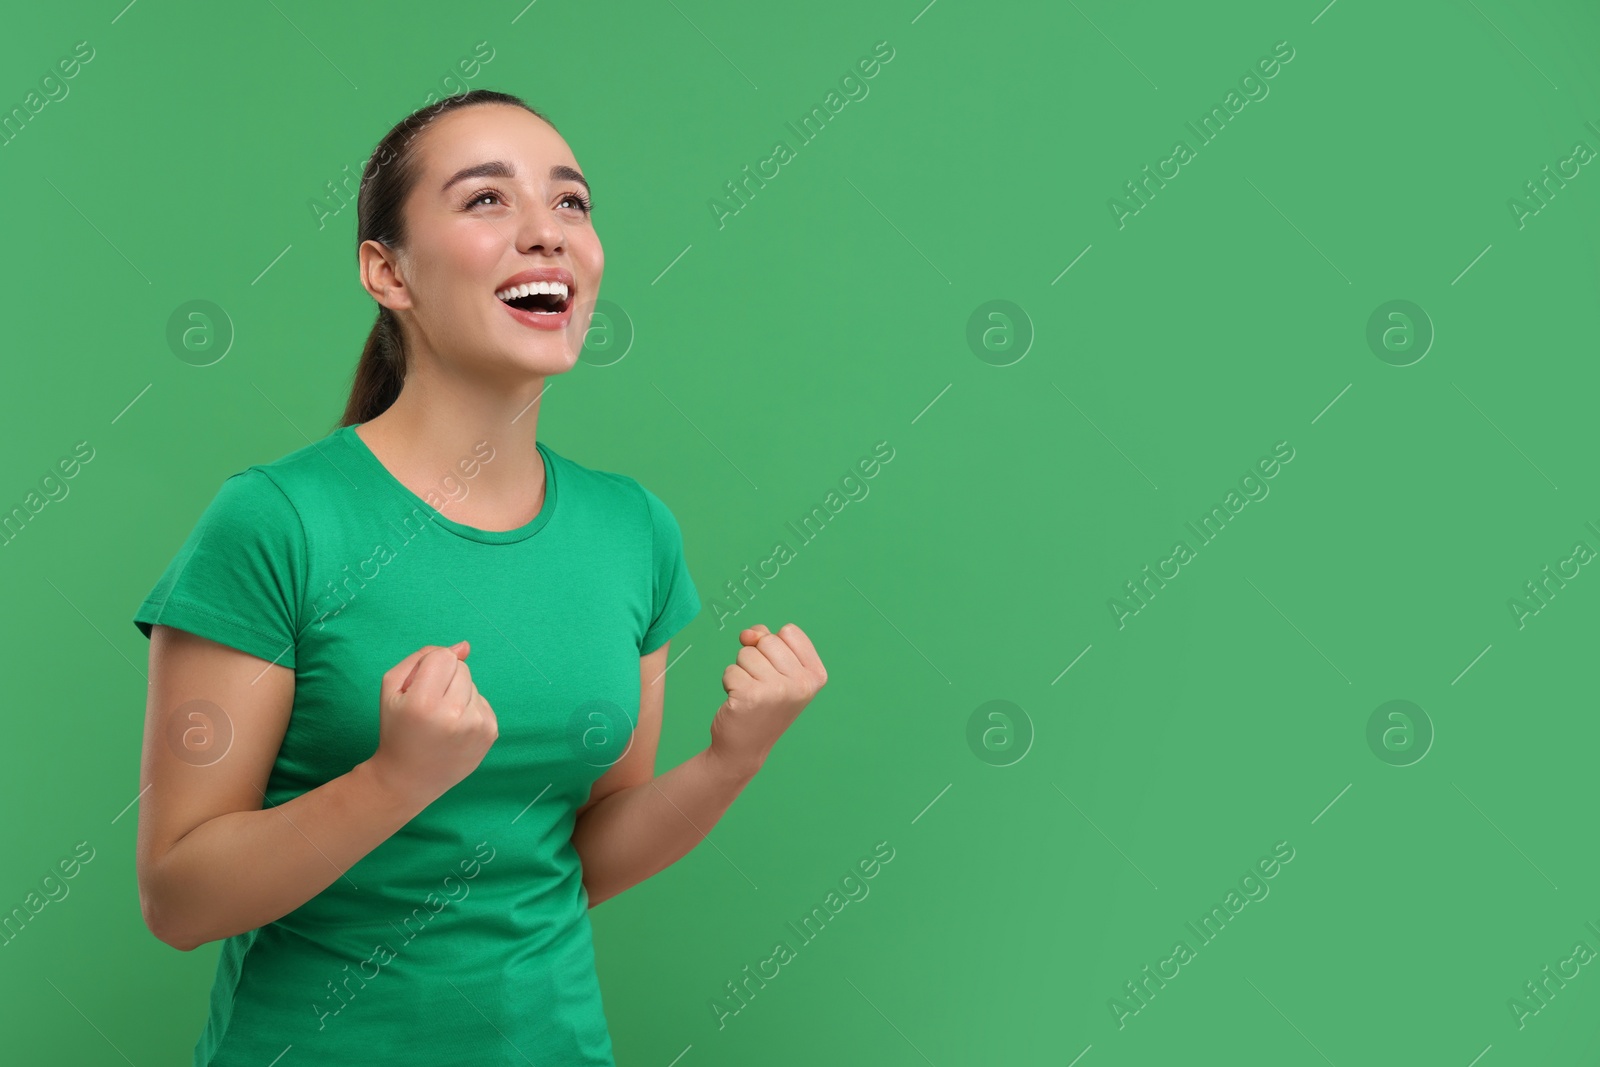 Photo of Happy sports fan celebrating on green background, space for text